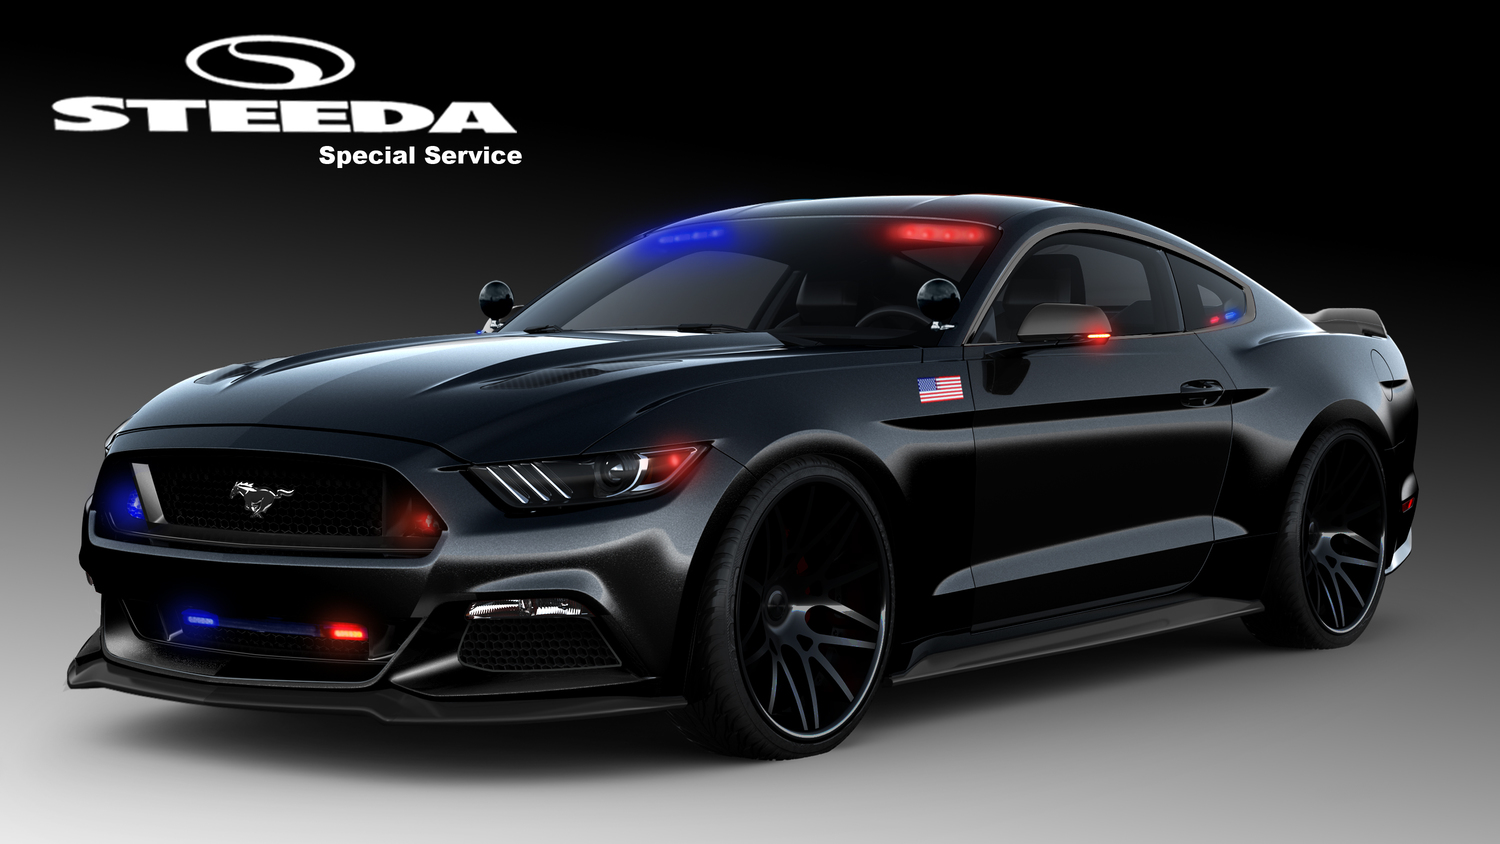 S550 Mustang Police Car From Steeda Is Ready To Protect And Serve 